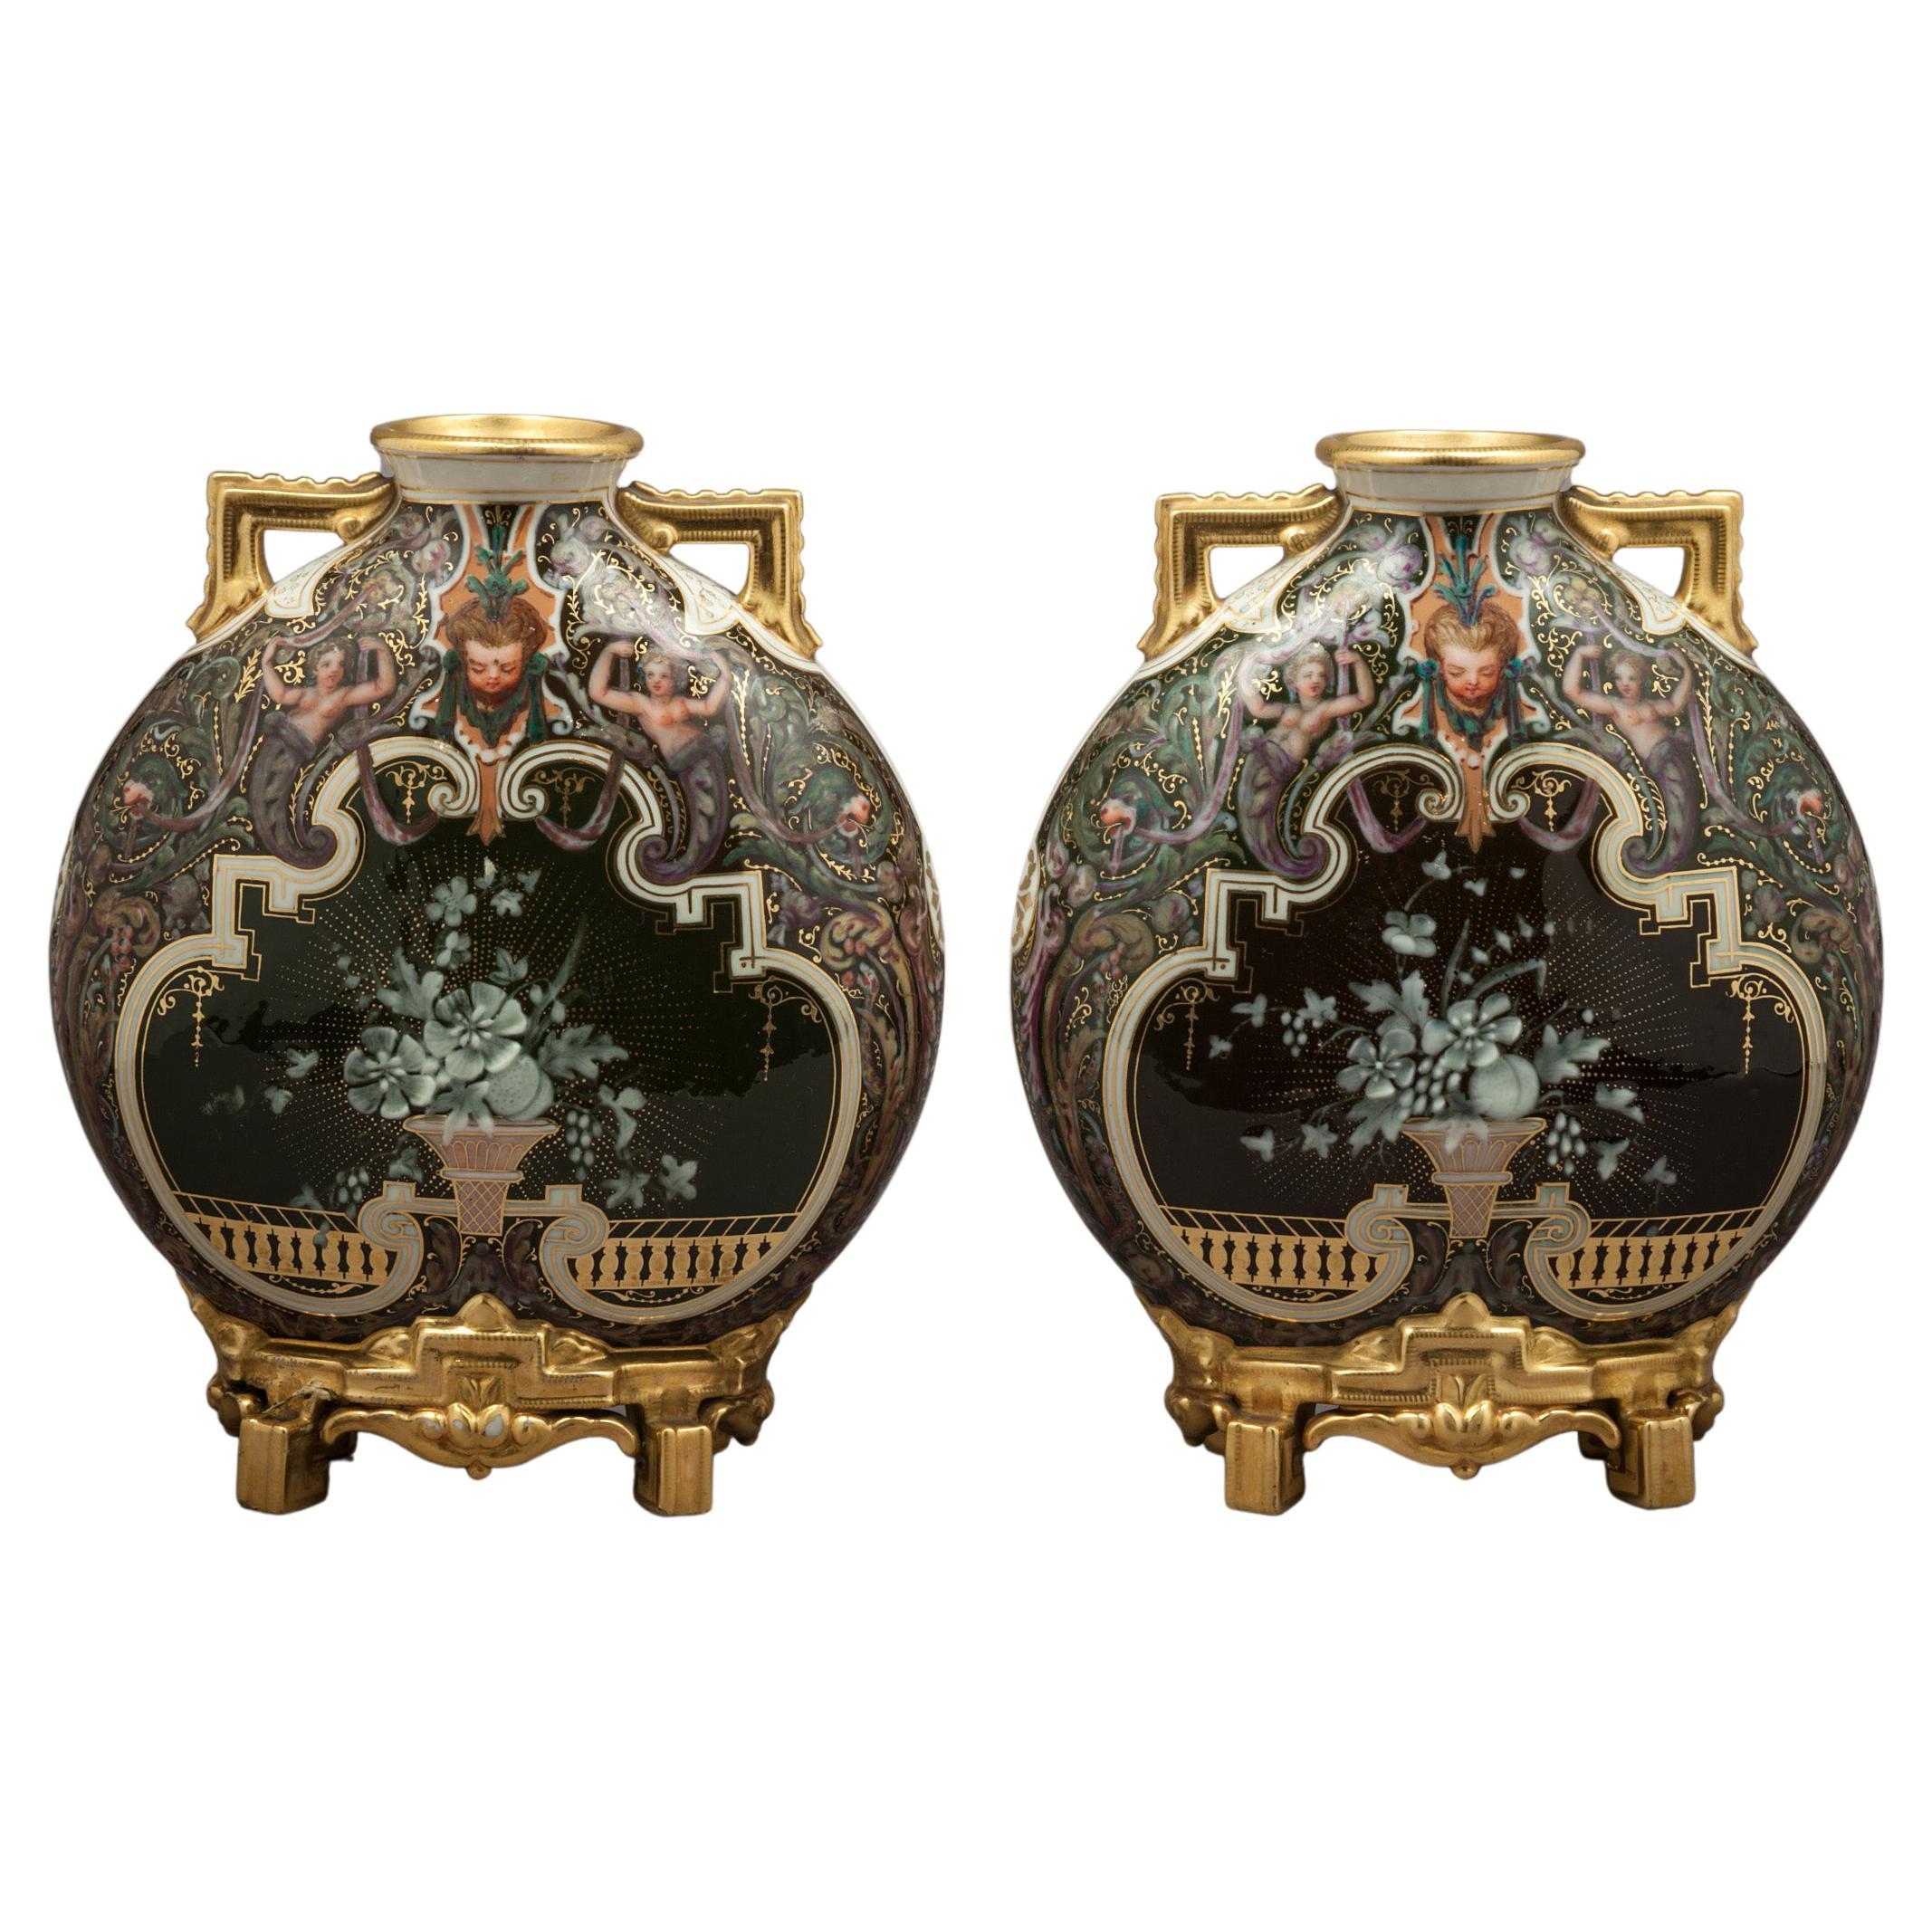 Pair of Rare Royal Worcester Pate-Sur-Pate Vases, circa 1890 For Sale